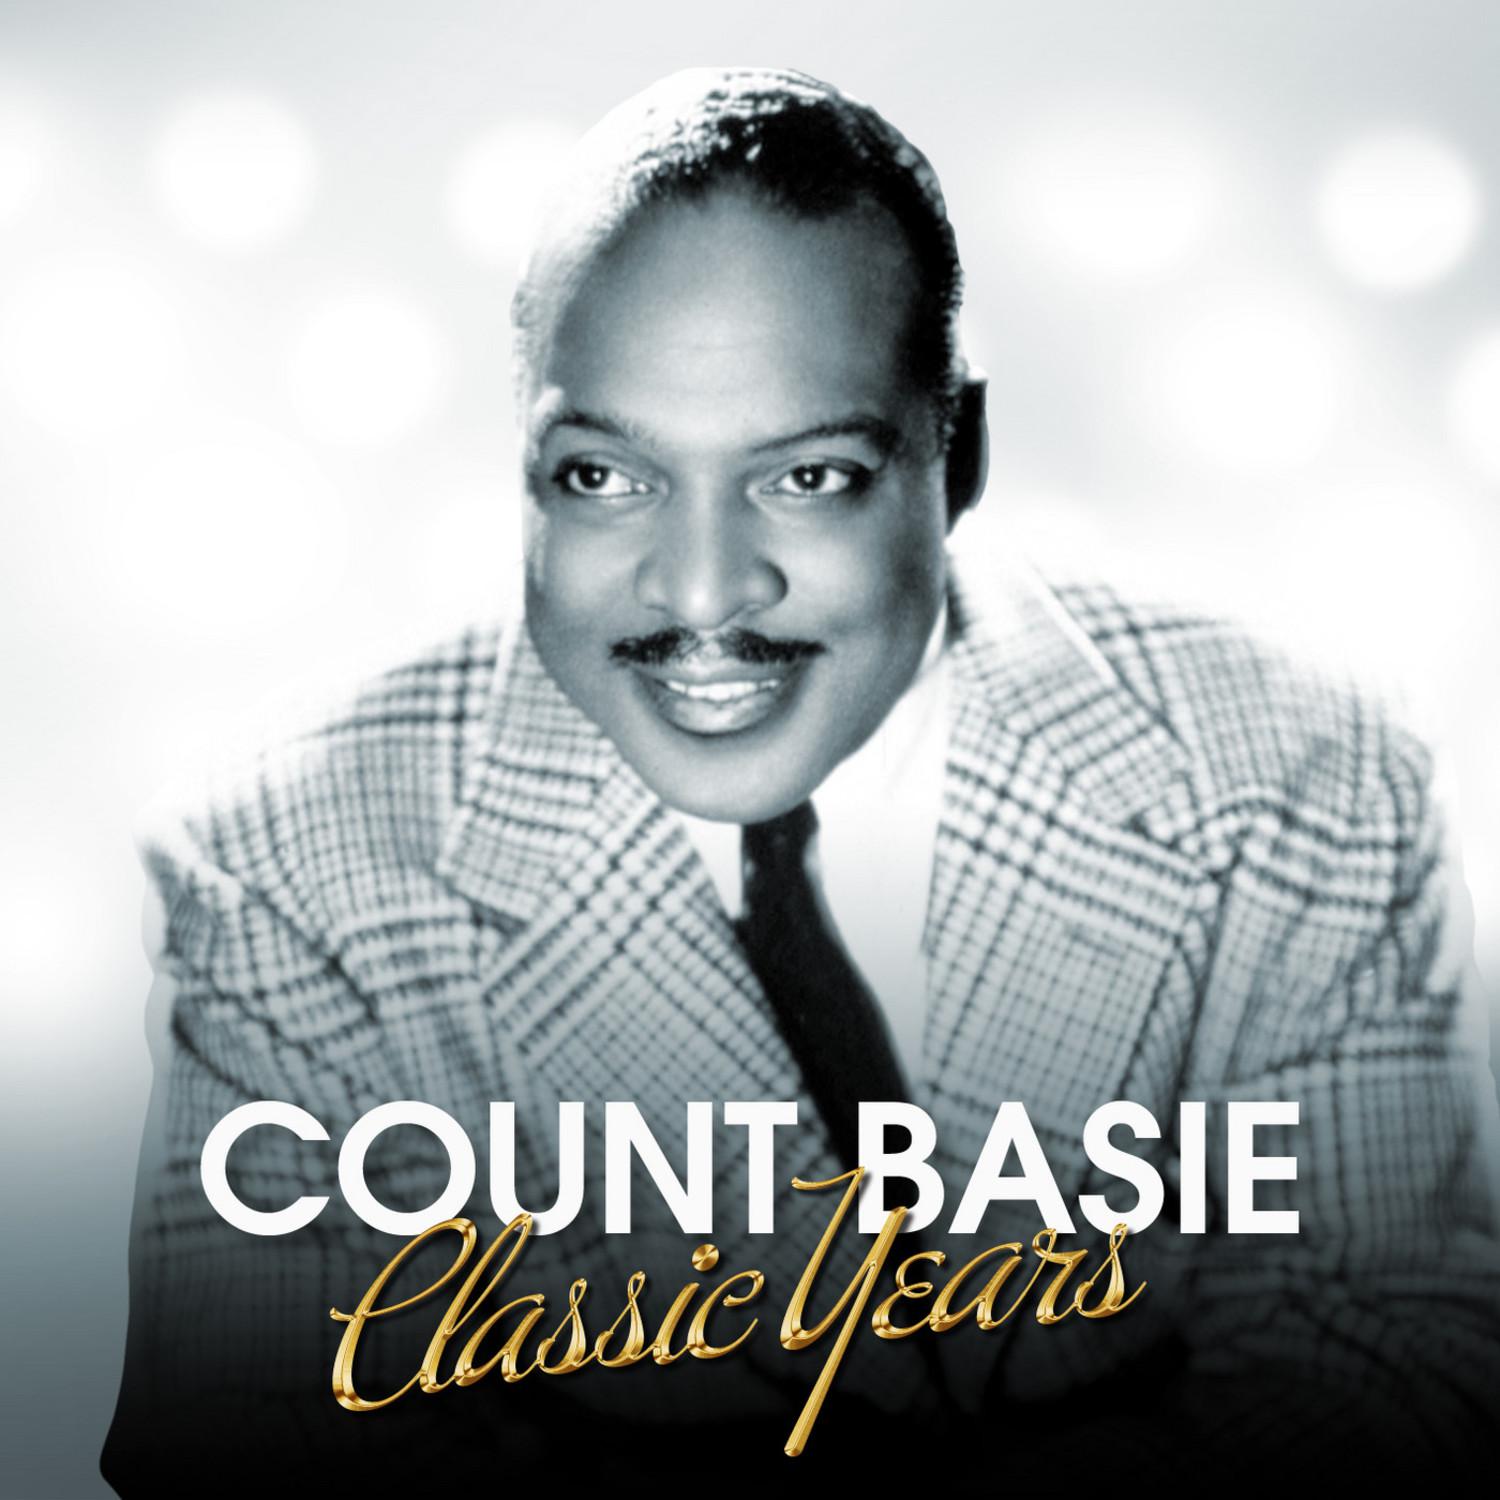 Count Basie Classic - Years